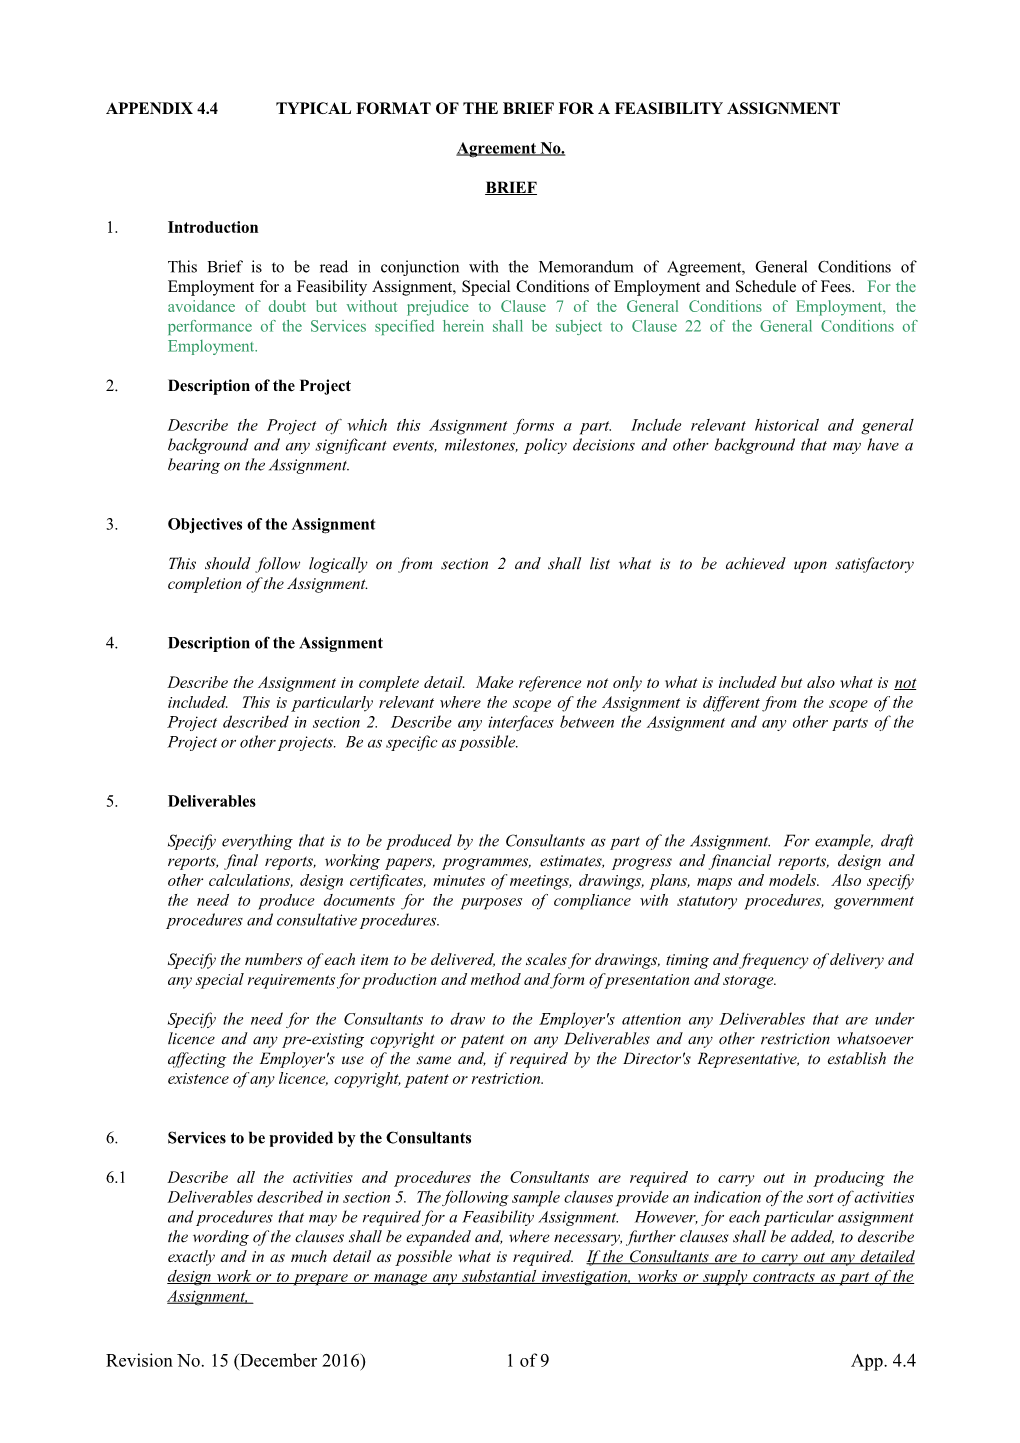 Appendix 4.4Typical Format of the Brief for a Feasibility Assignment